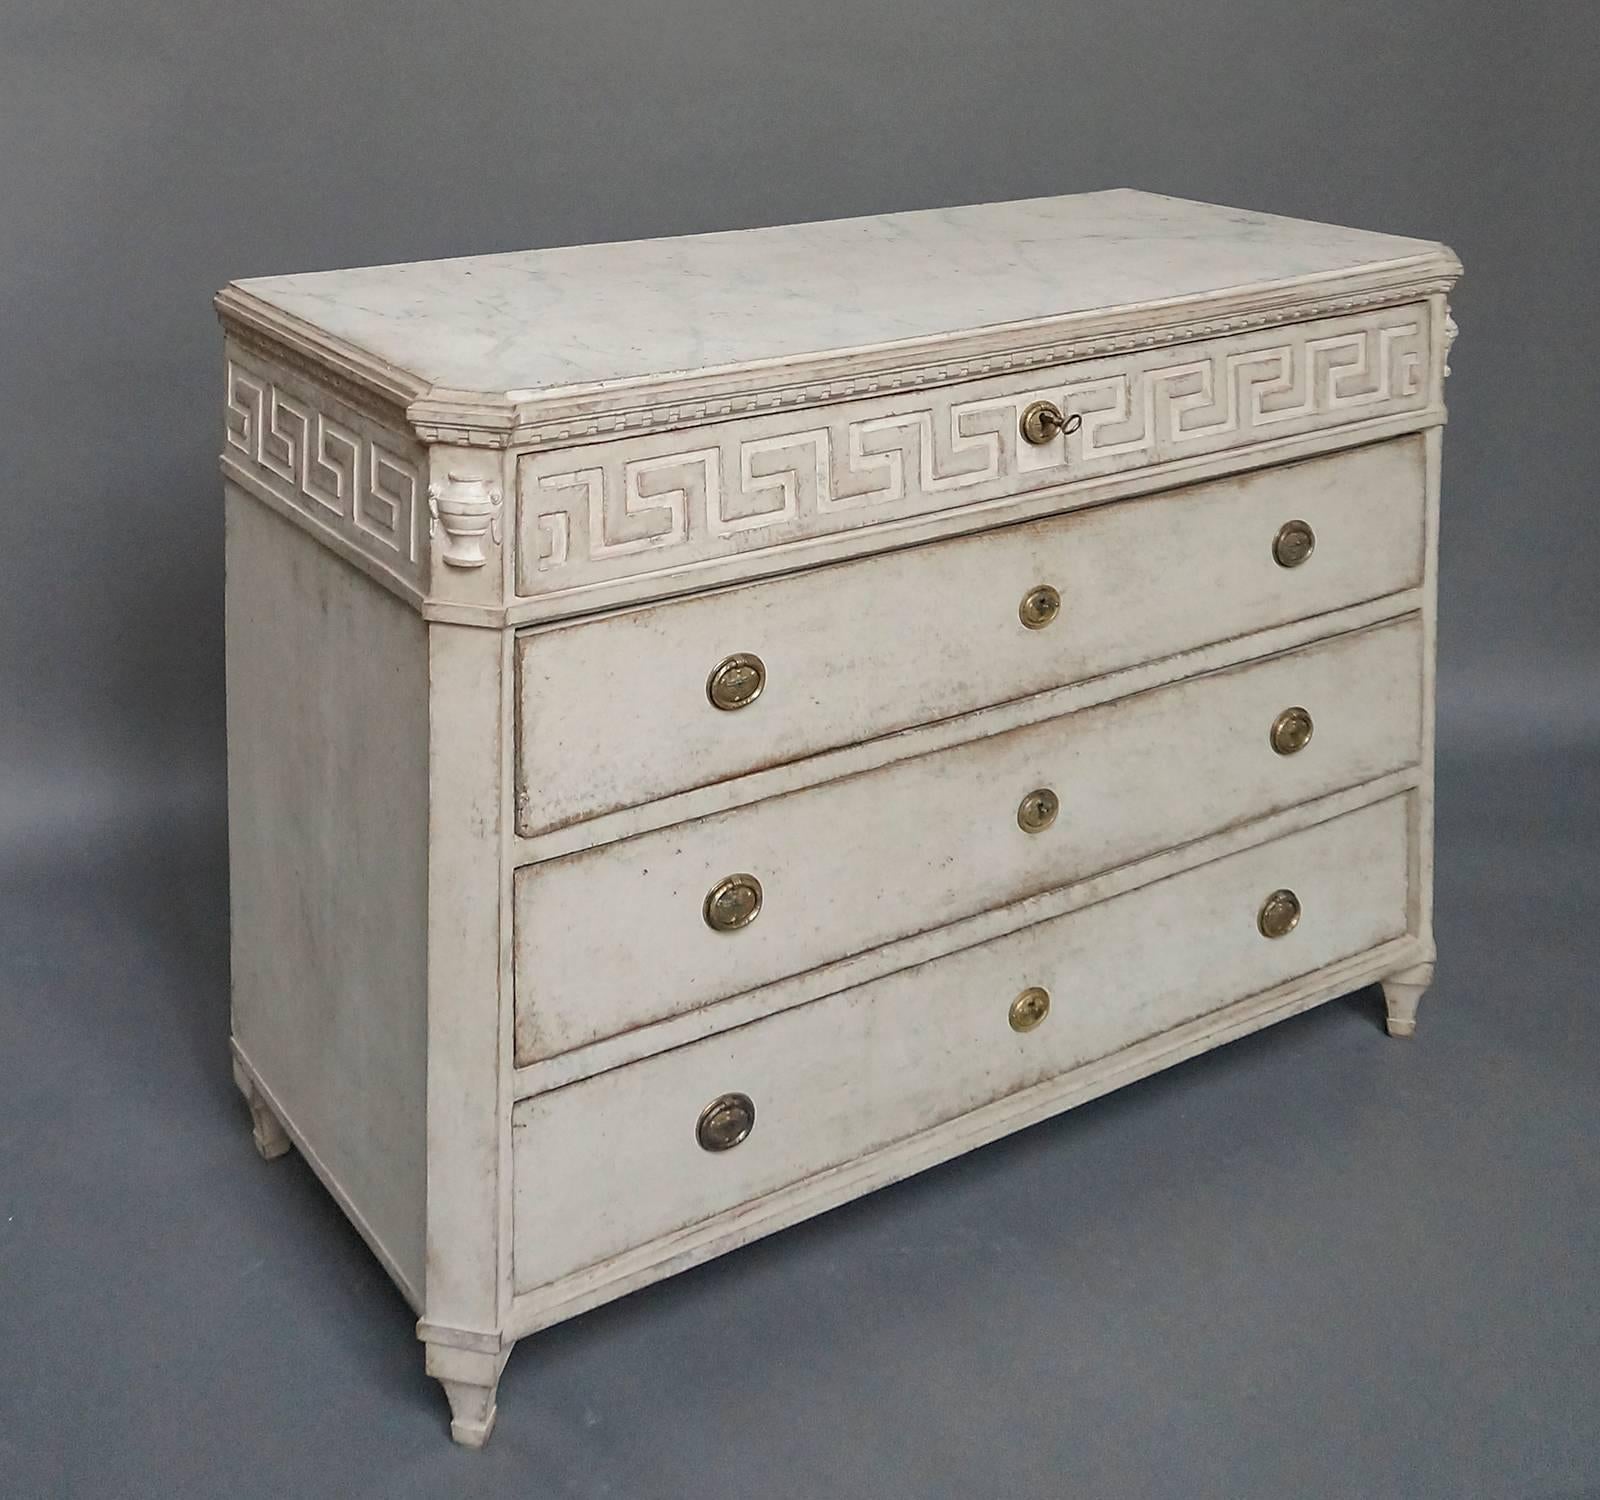 Swedish chest of drawers, circa 1860, with Greek key detail on the top drawer front and continuing around the sides. Canted corners with applied half-urns at the tops. Shaped top with painted marbling. Tapering square legs.